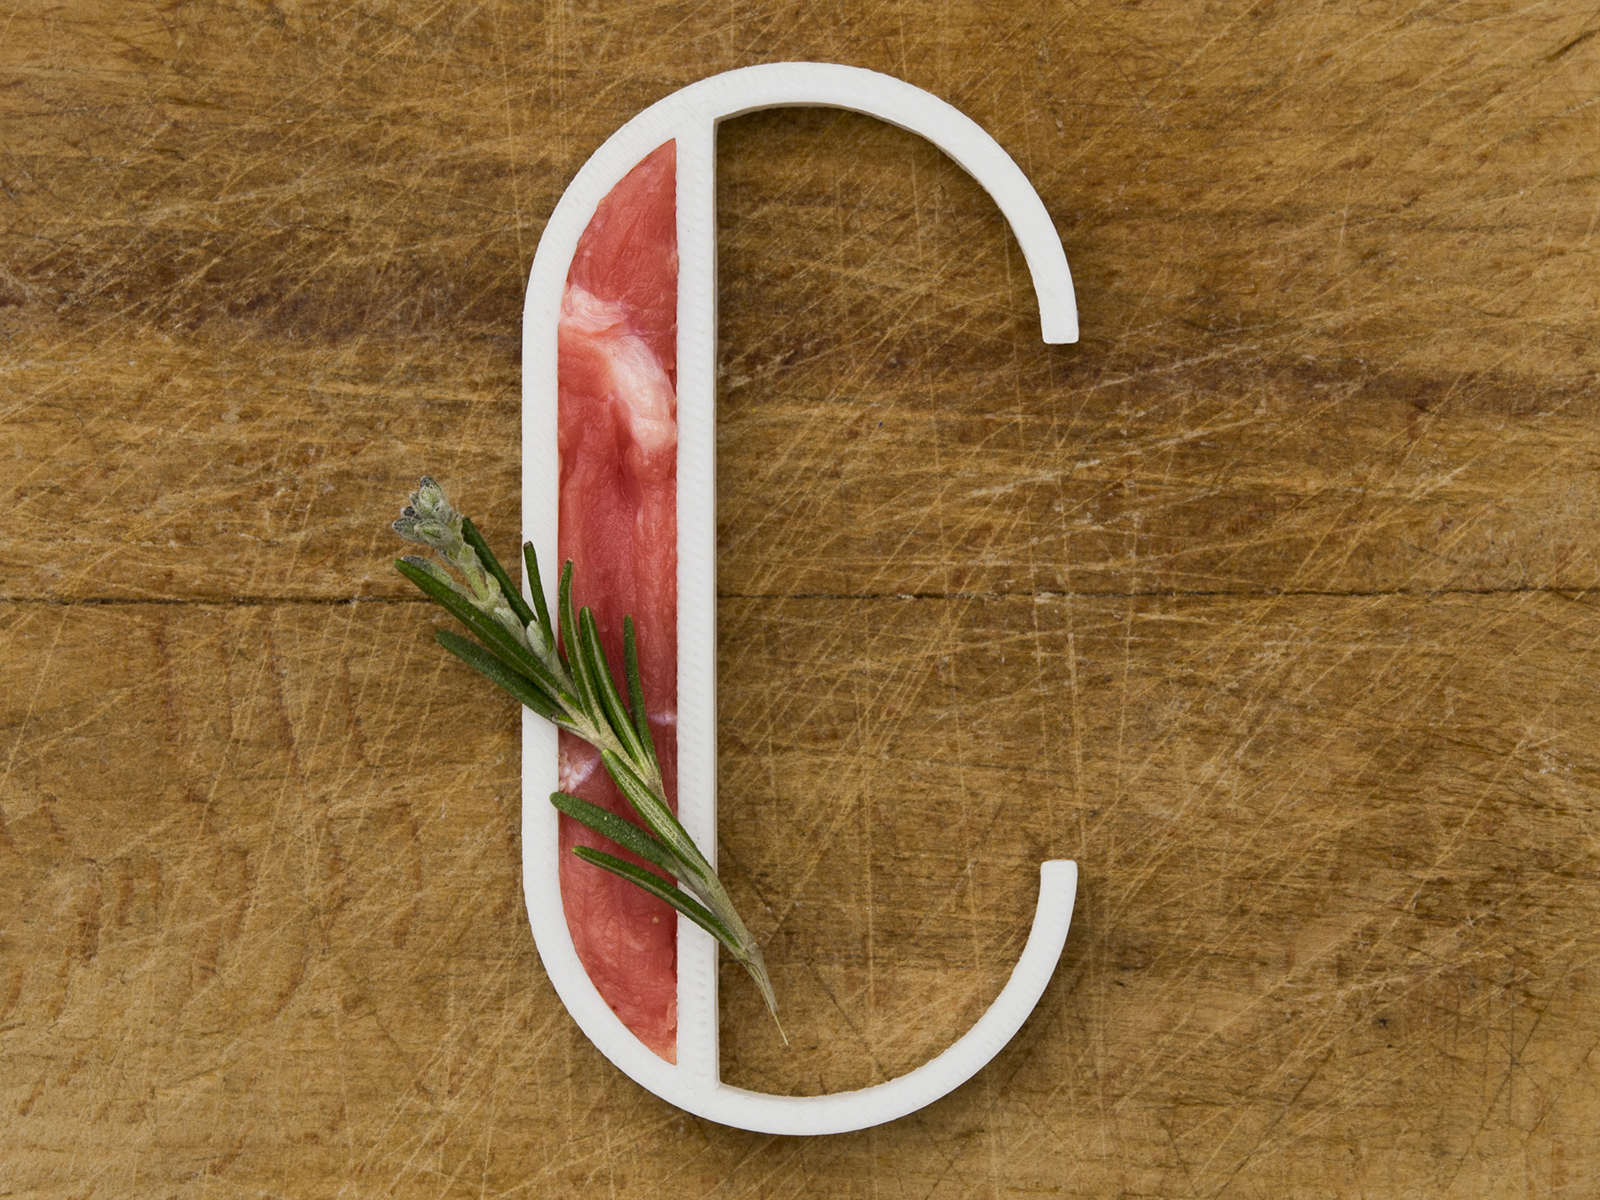 C for Carne (Meat) 36days 36daysoftype 3d 3d print a letter a day alphabet blender blender 3d c illustration letter letter c meat project real rosemary typo typography vector wood